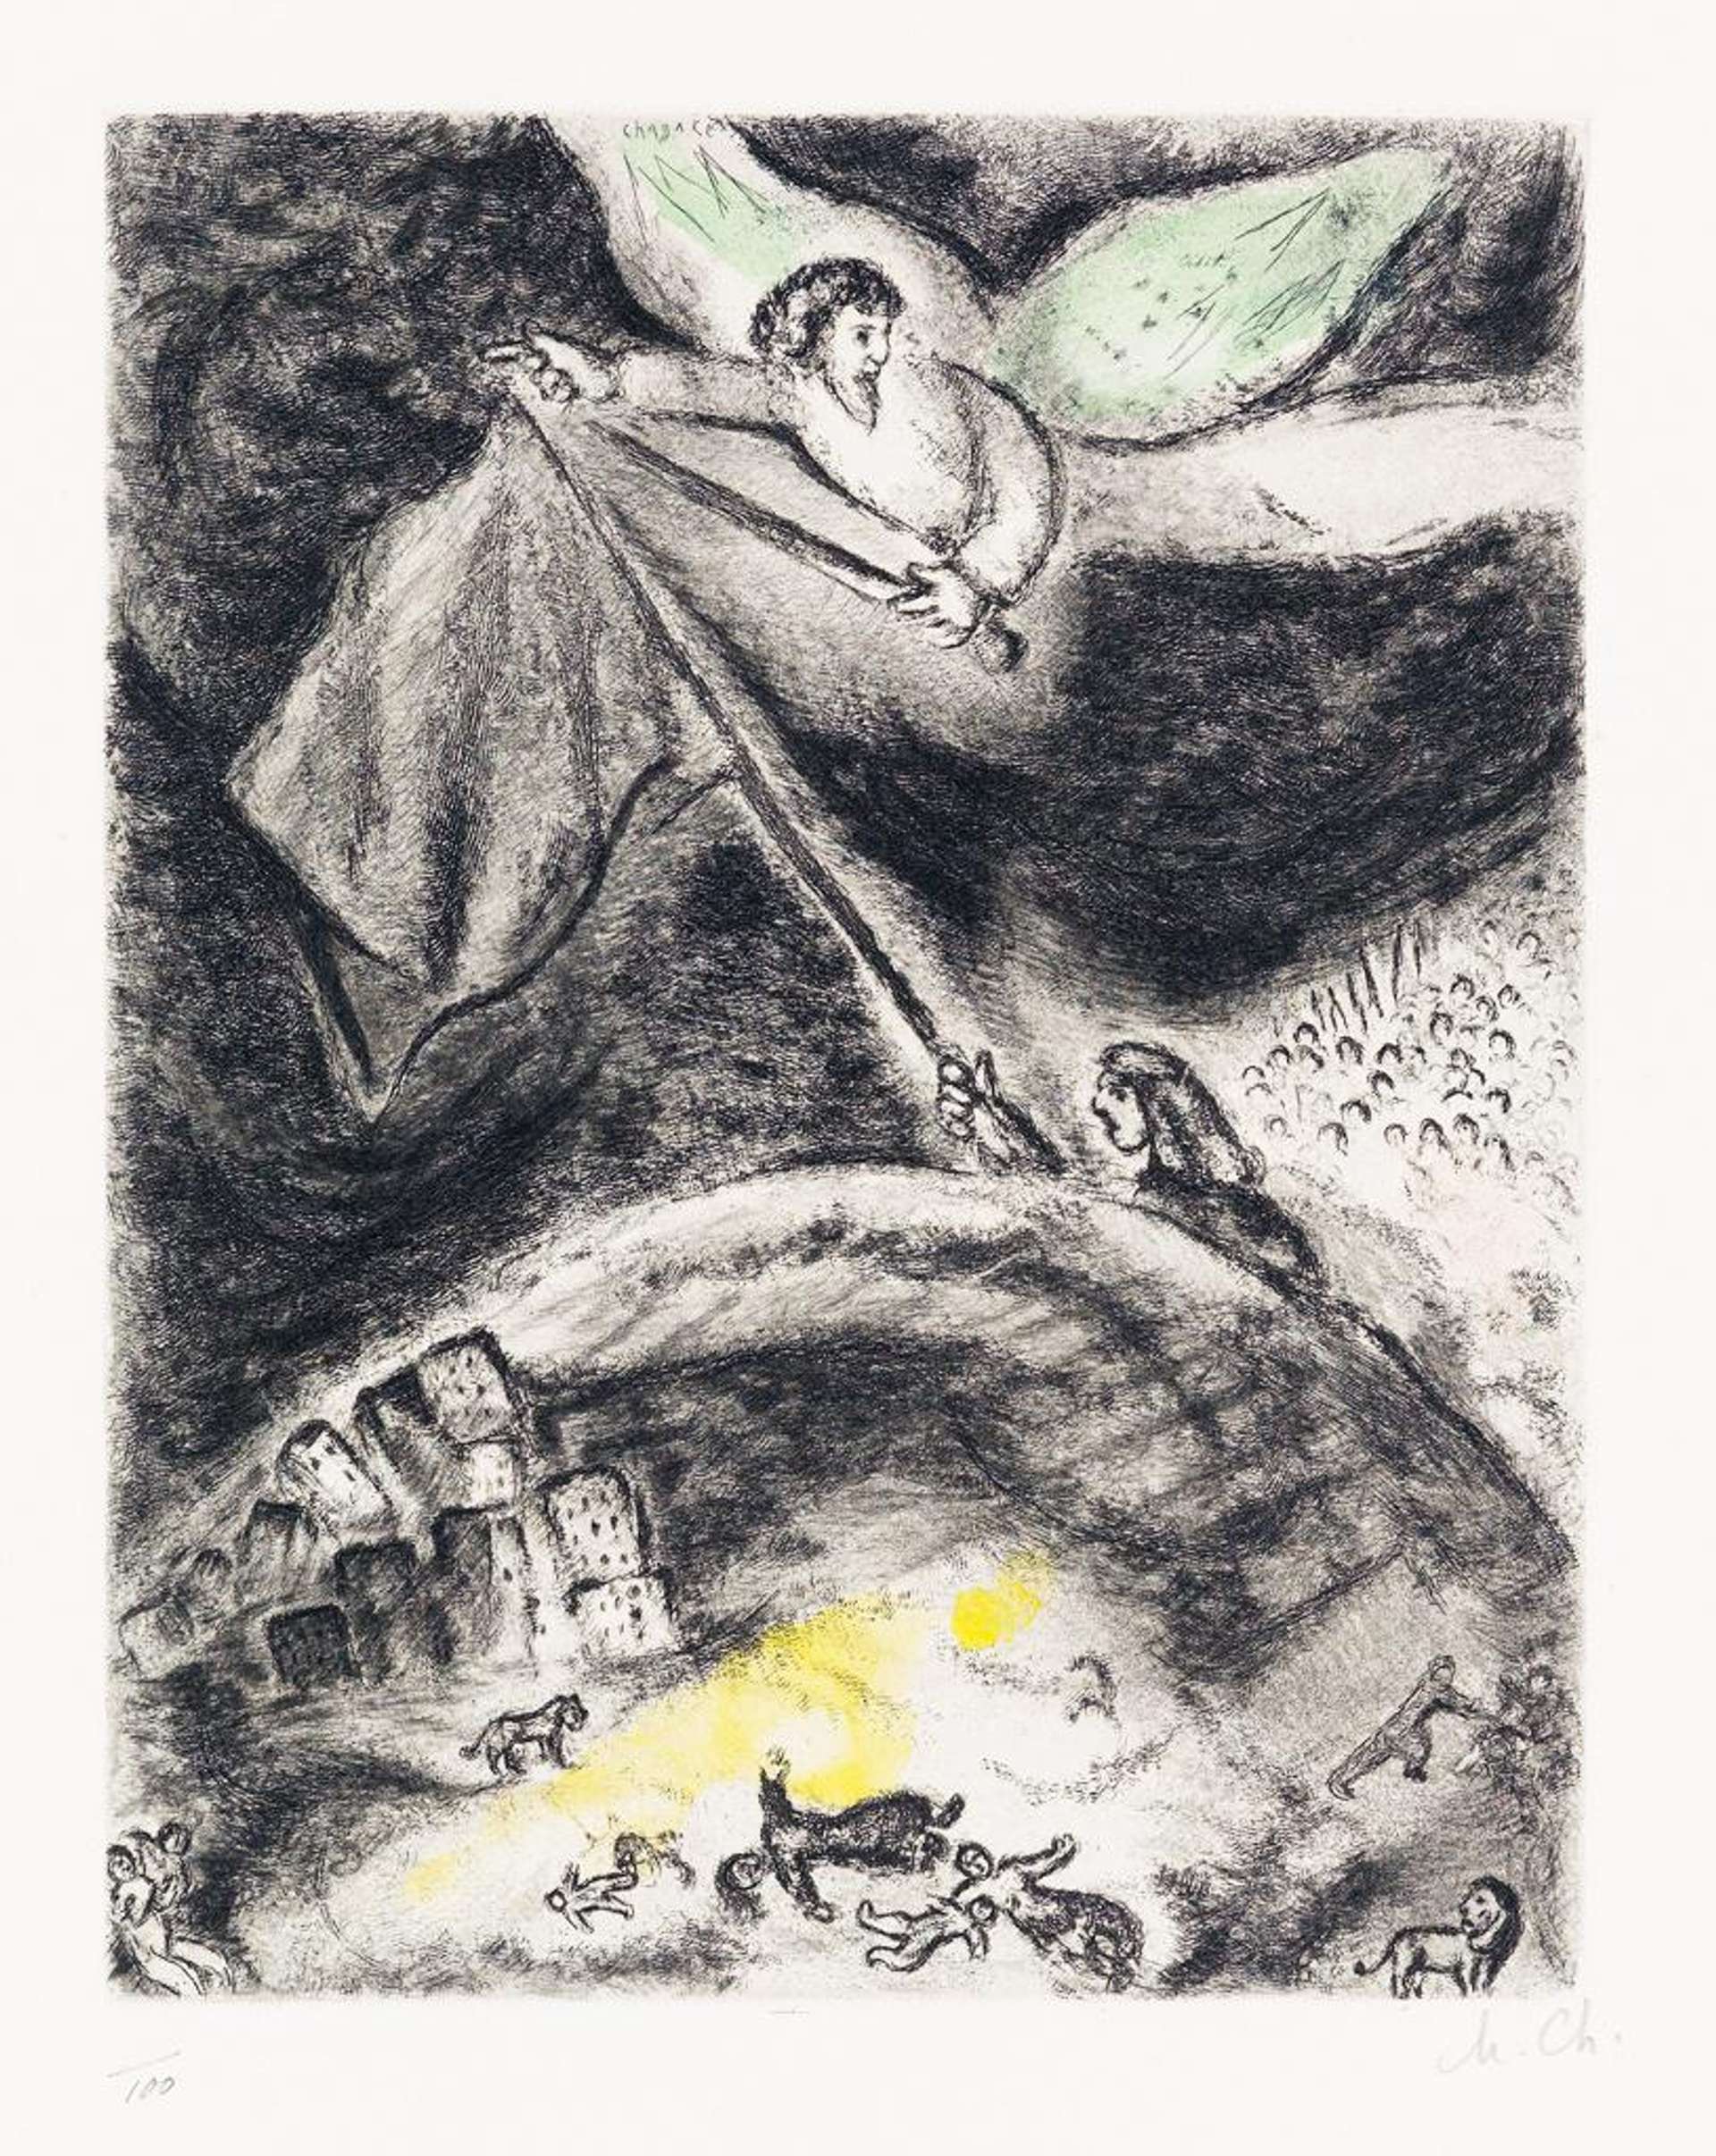 Oracle Sur Babylone (La Bible) - Signed Print by Marc Chagall 1931 - MyArtBroker